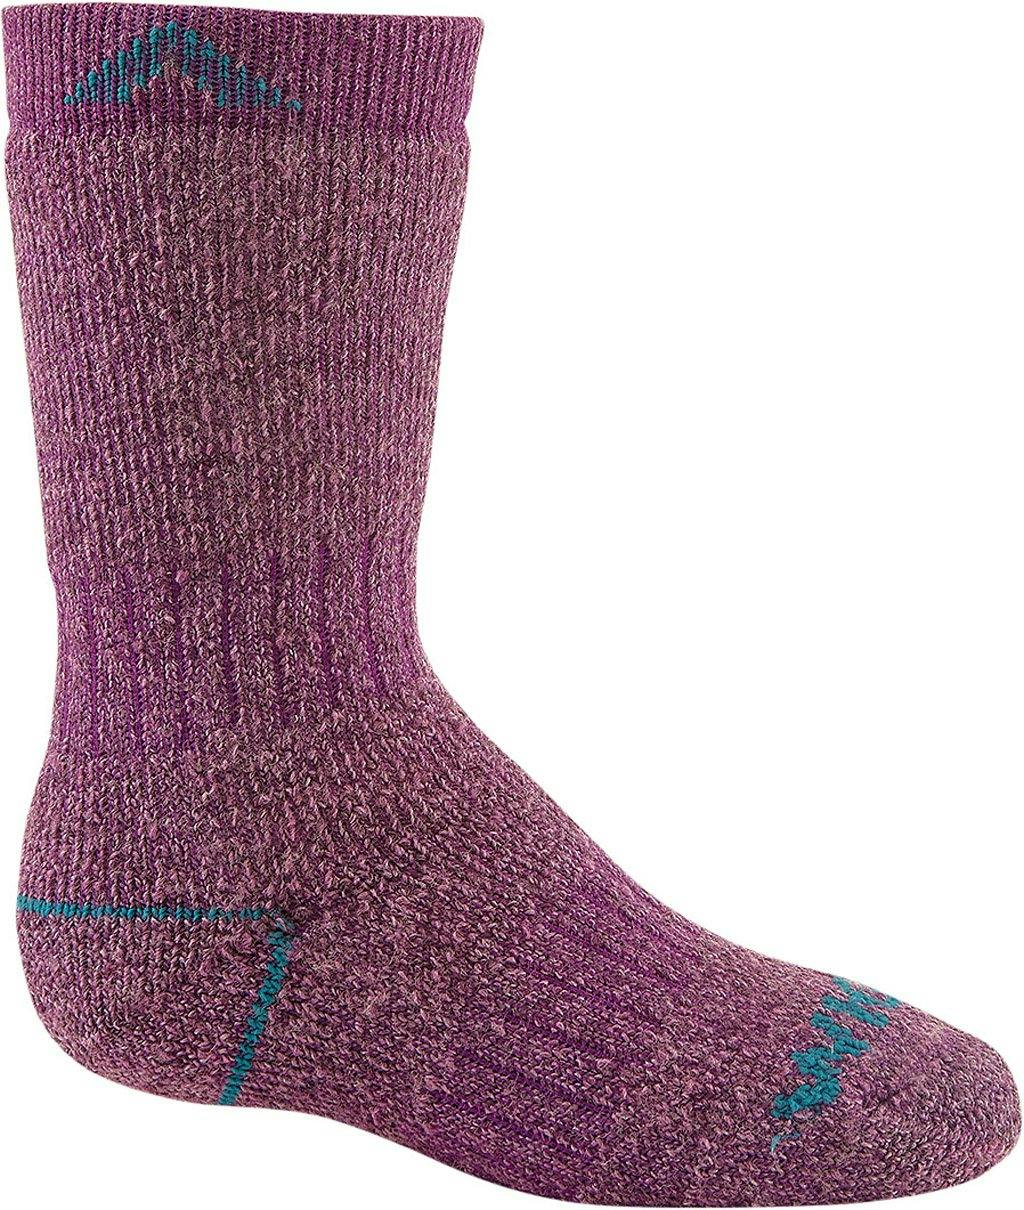 Product image for 40 Below II Socks - Youth